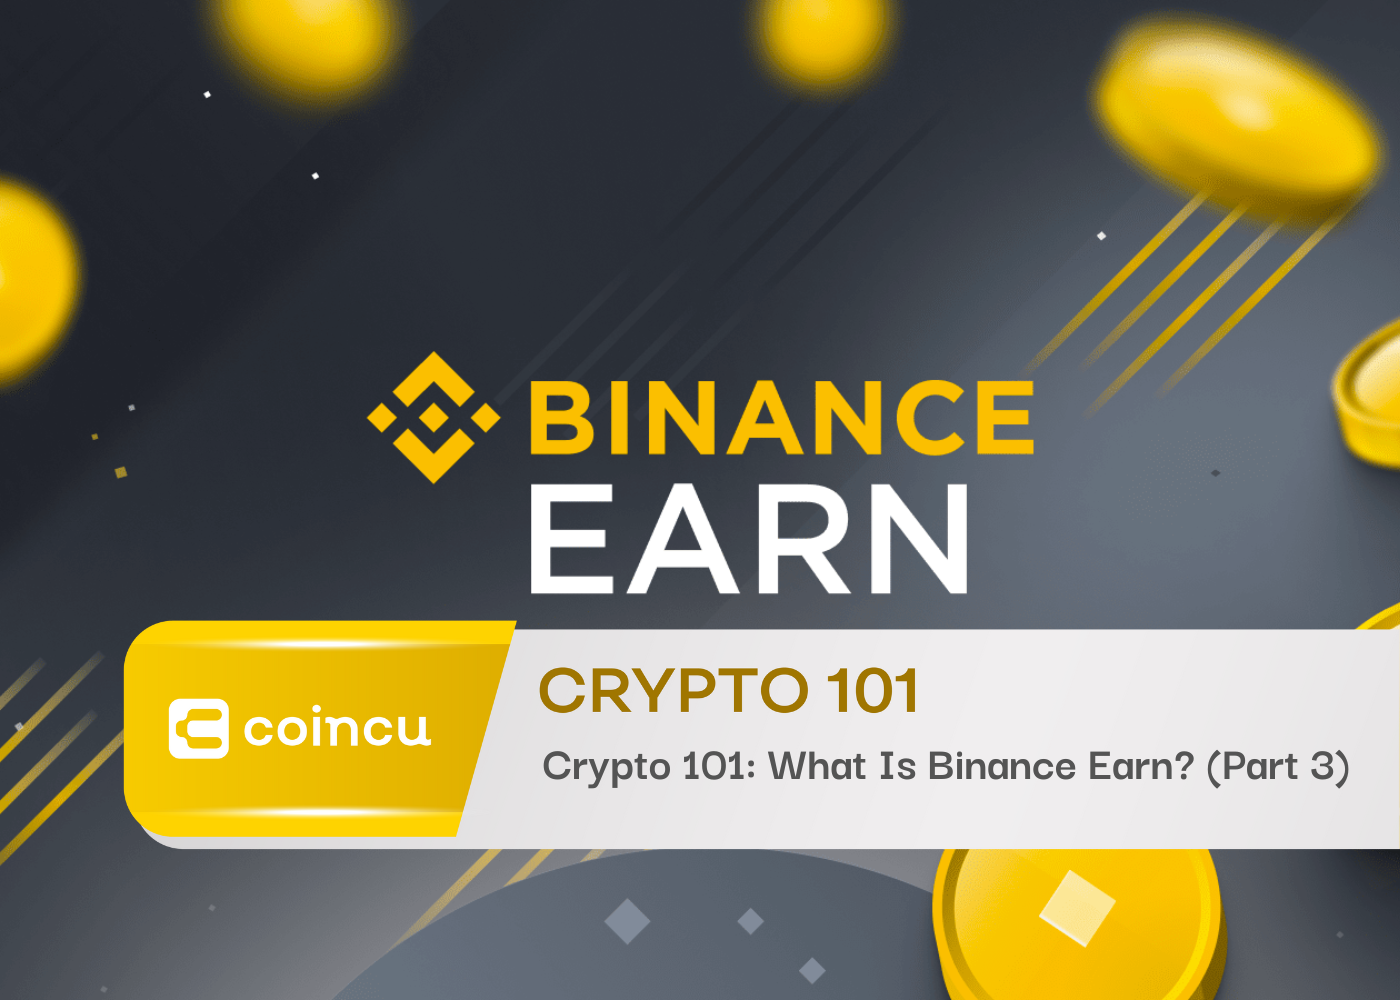 Crypto 101: What Is Binance Earn? (Part 3)